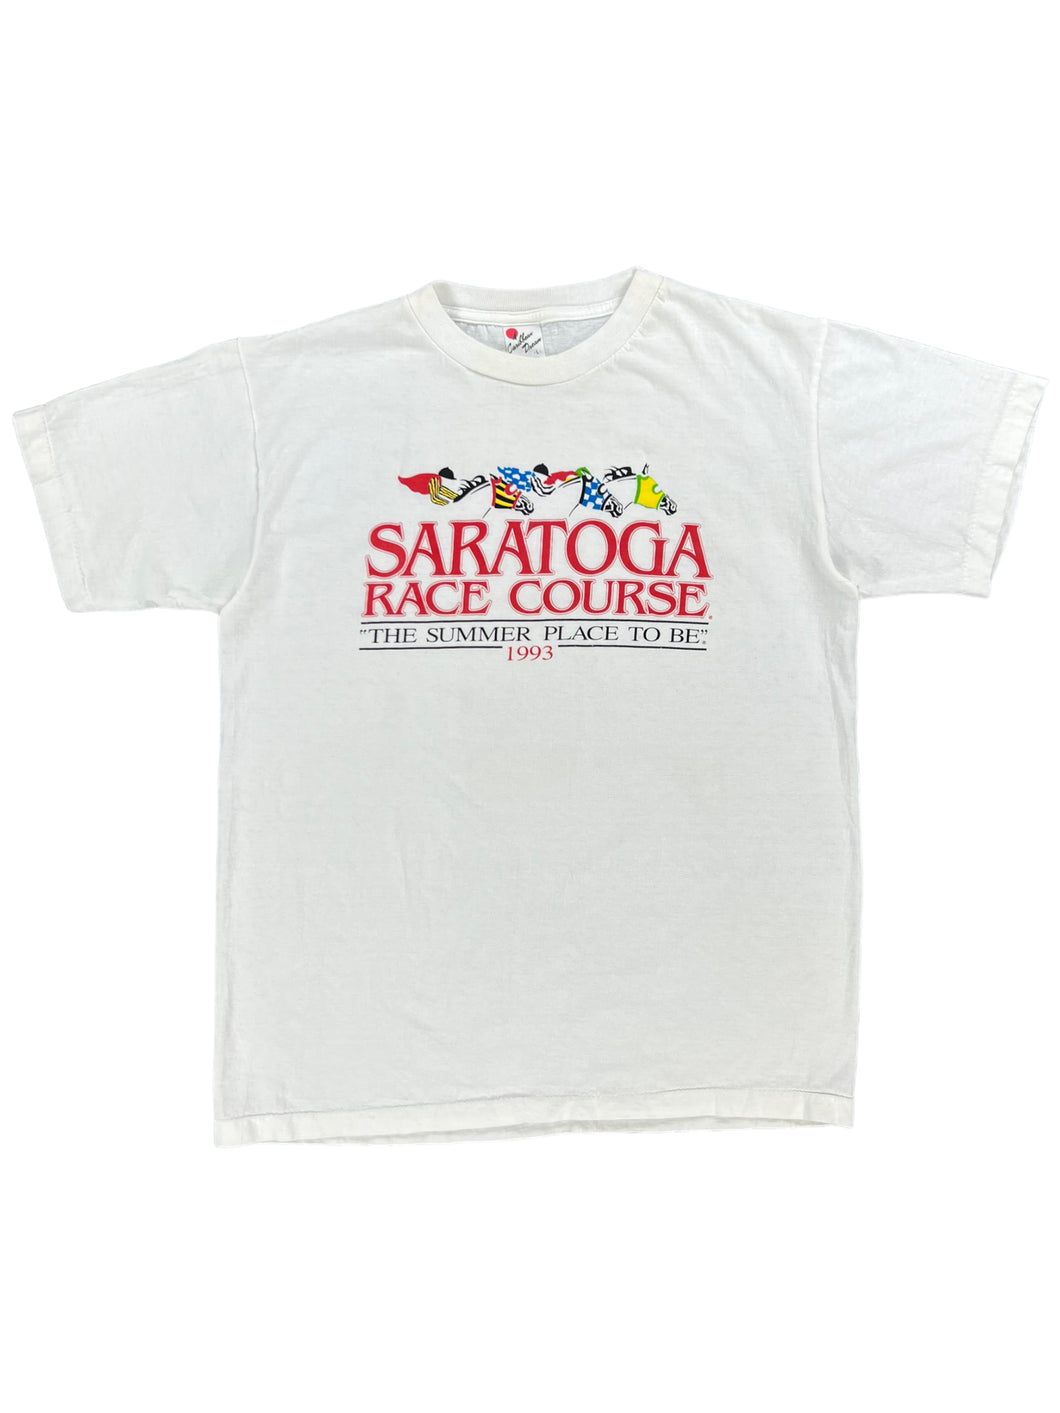 Vintage 1993 Saratoga Race Course “The Summer Place To Be” horse racing tee (L)